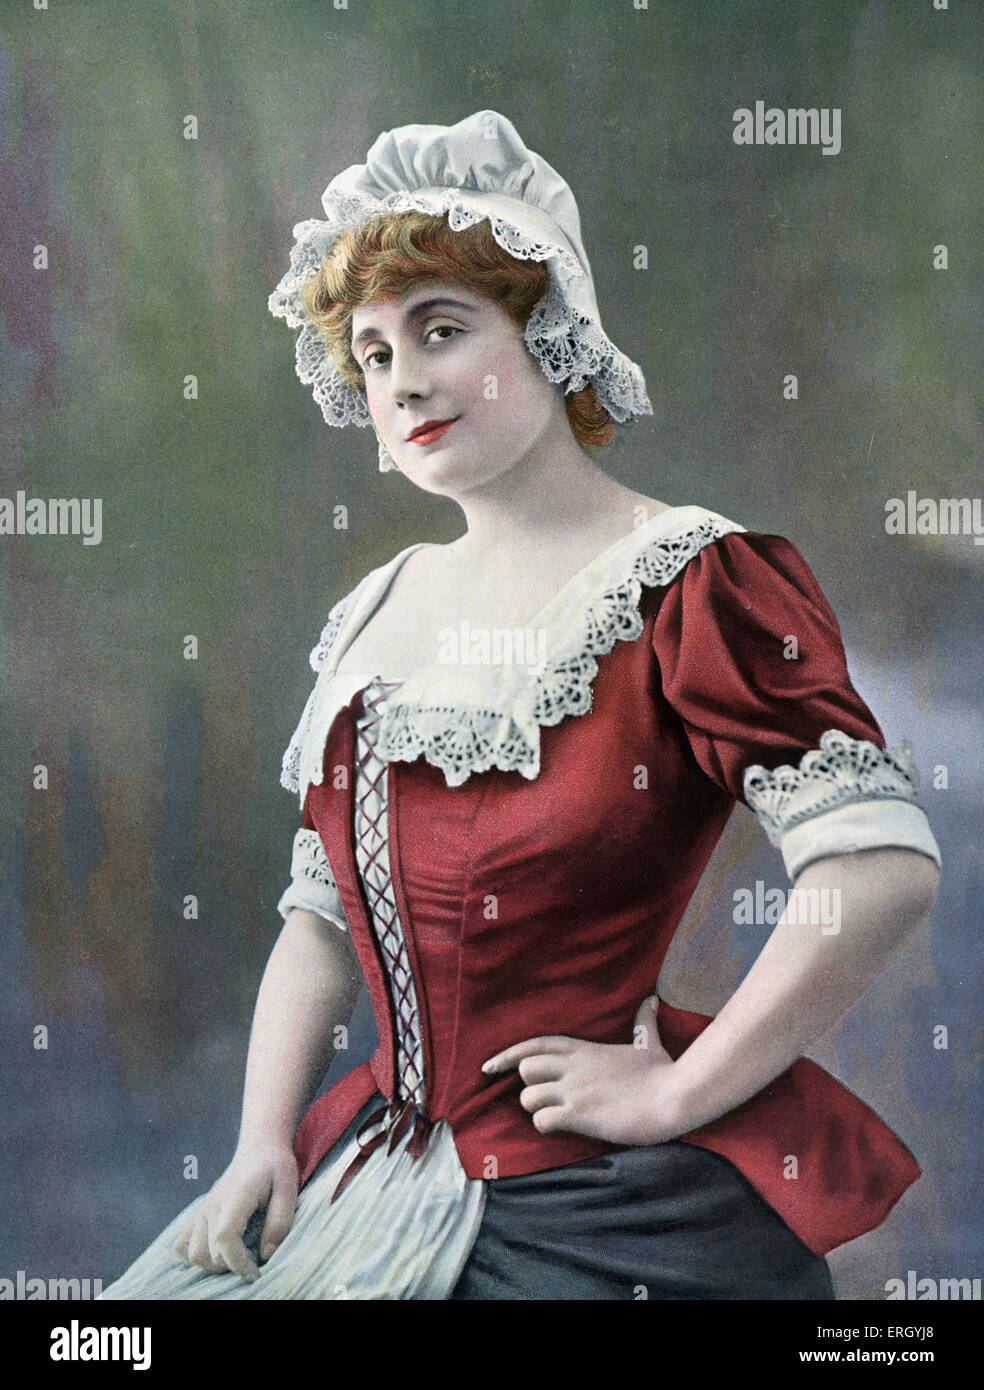 Simone Damaury as Francisquine in 'Petit Champ' at   the Exposition de l'Enfance, July 1905. Stock Photo